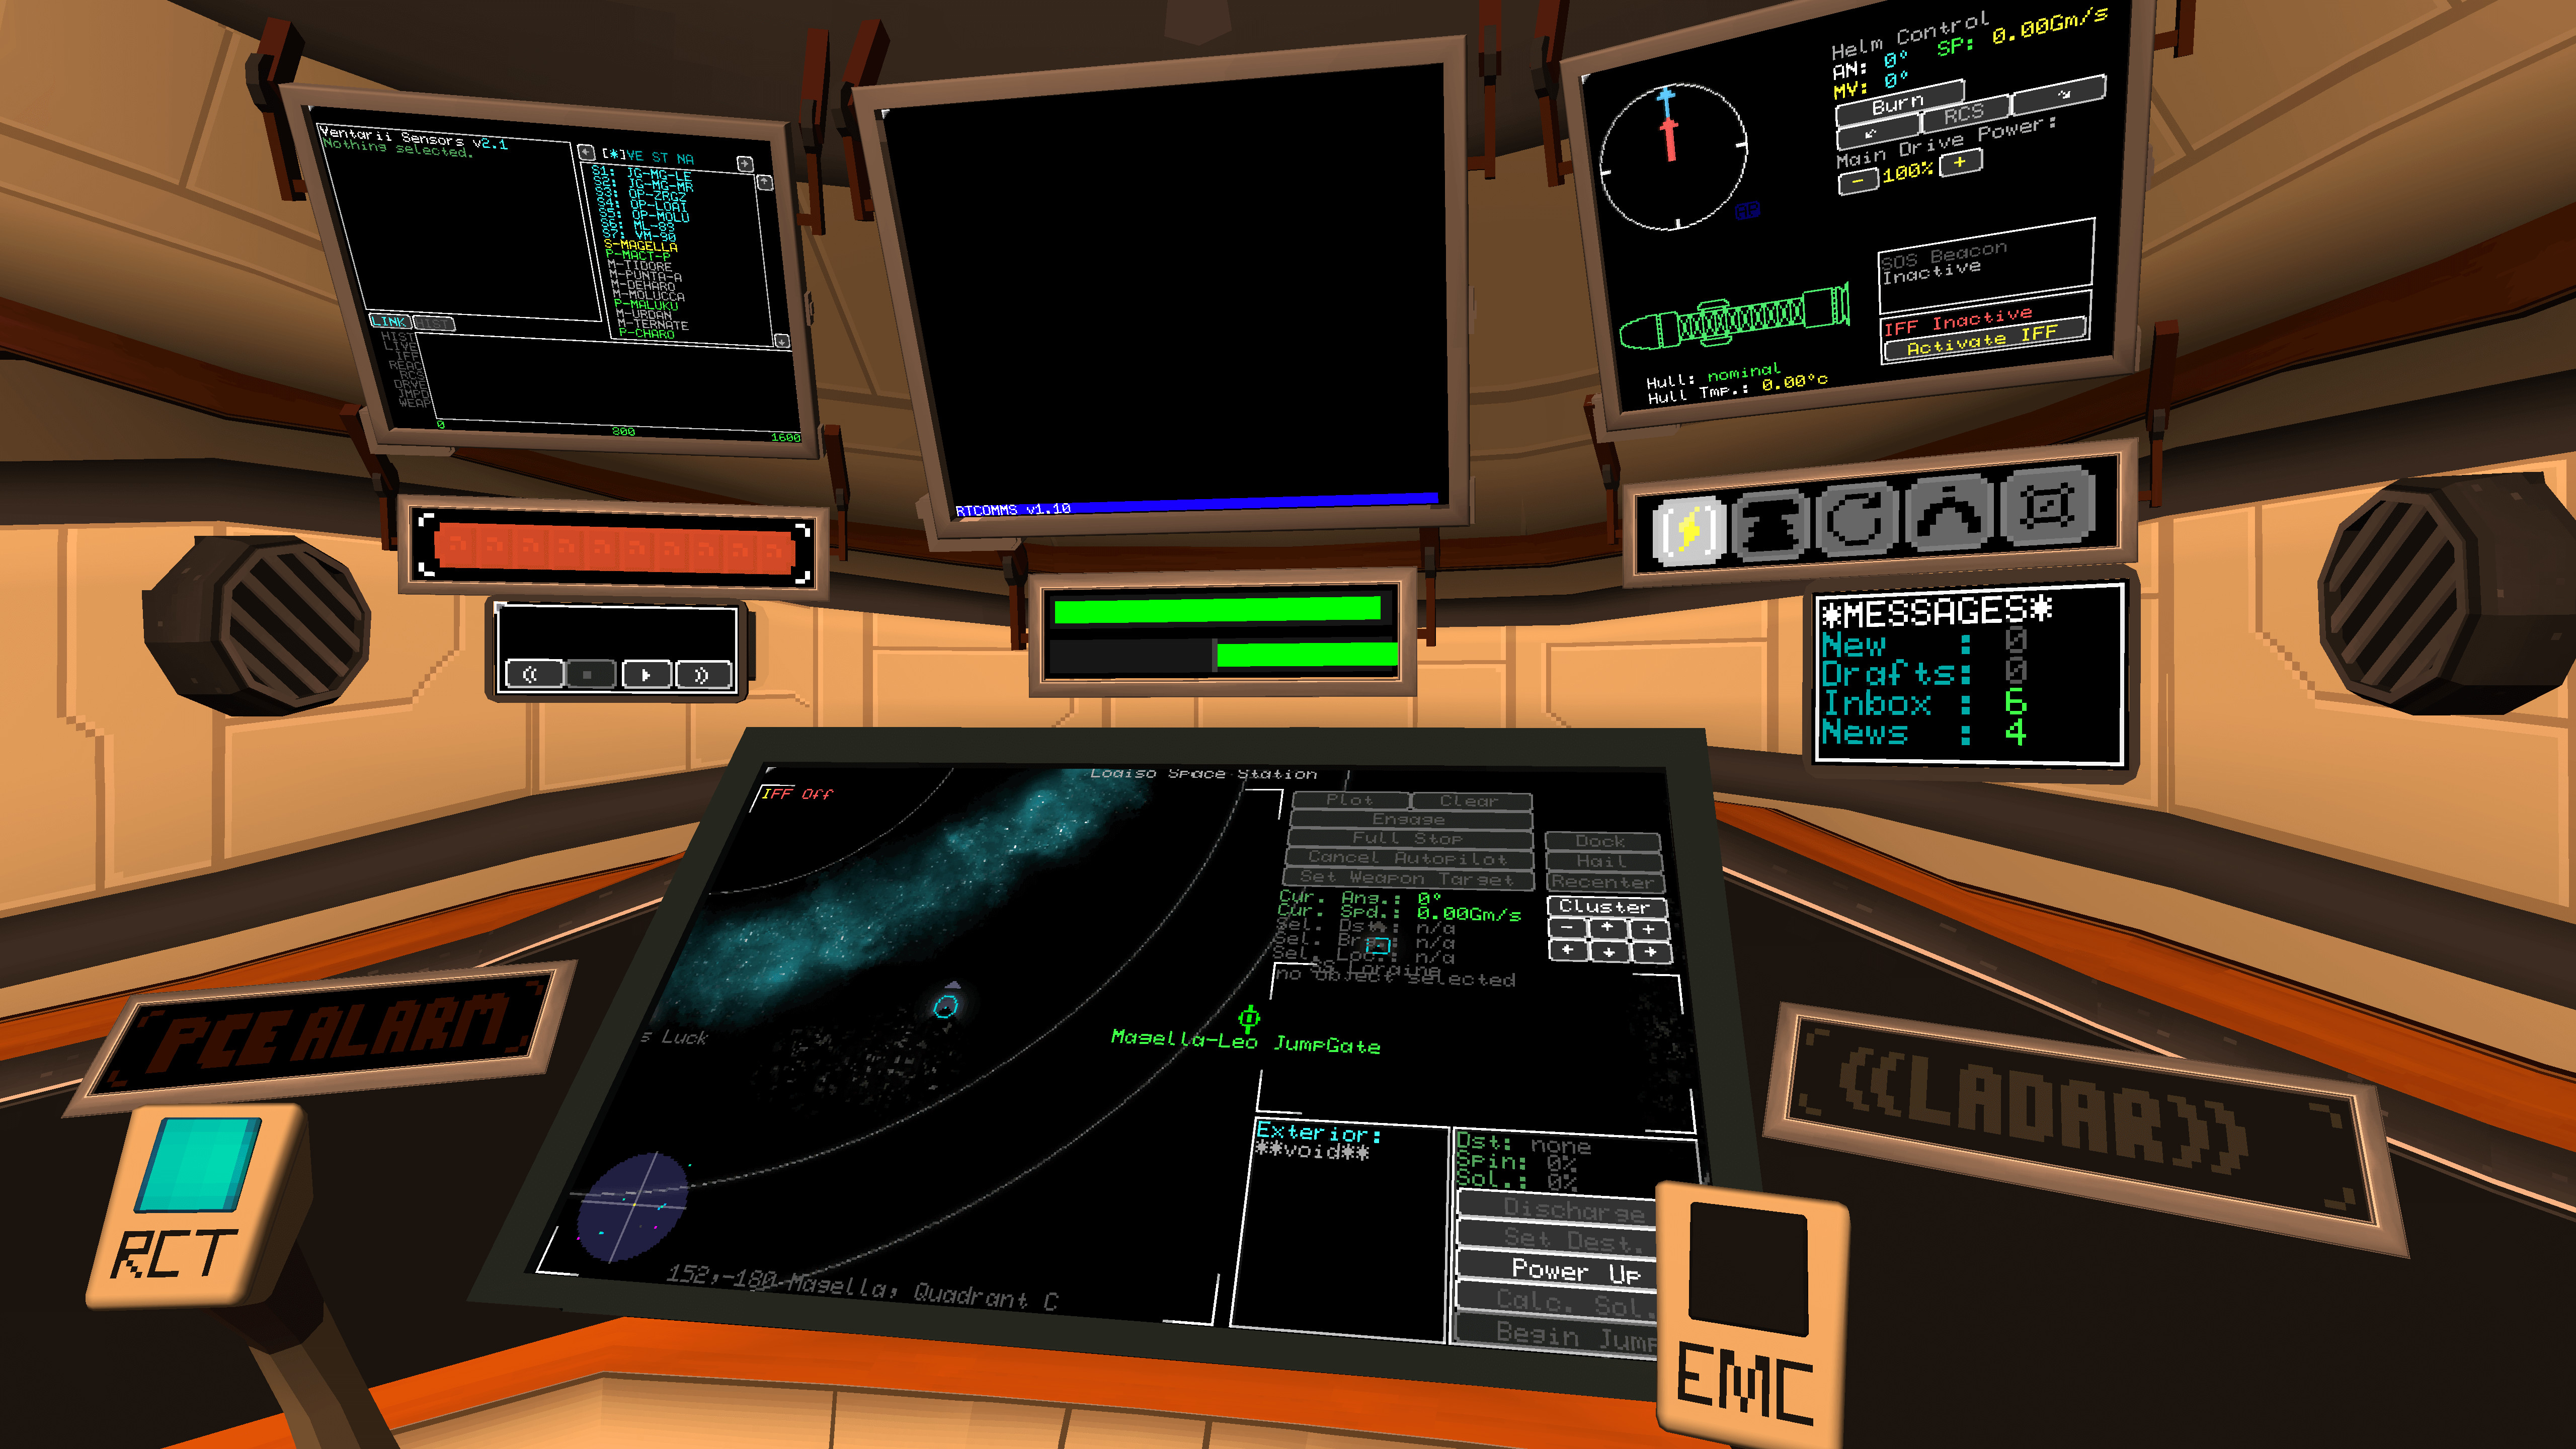 Objects in Space screenshot